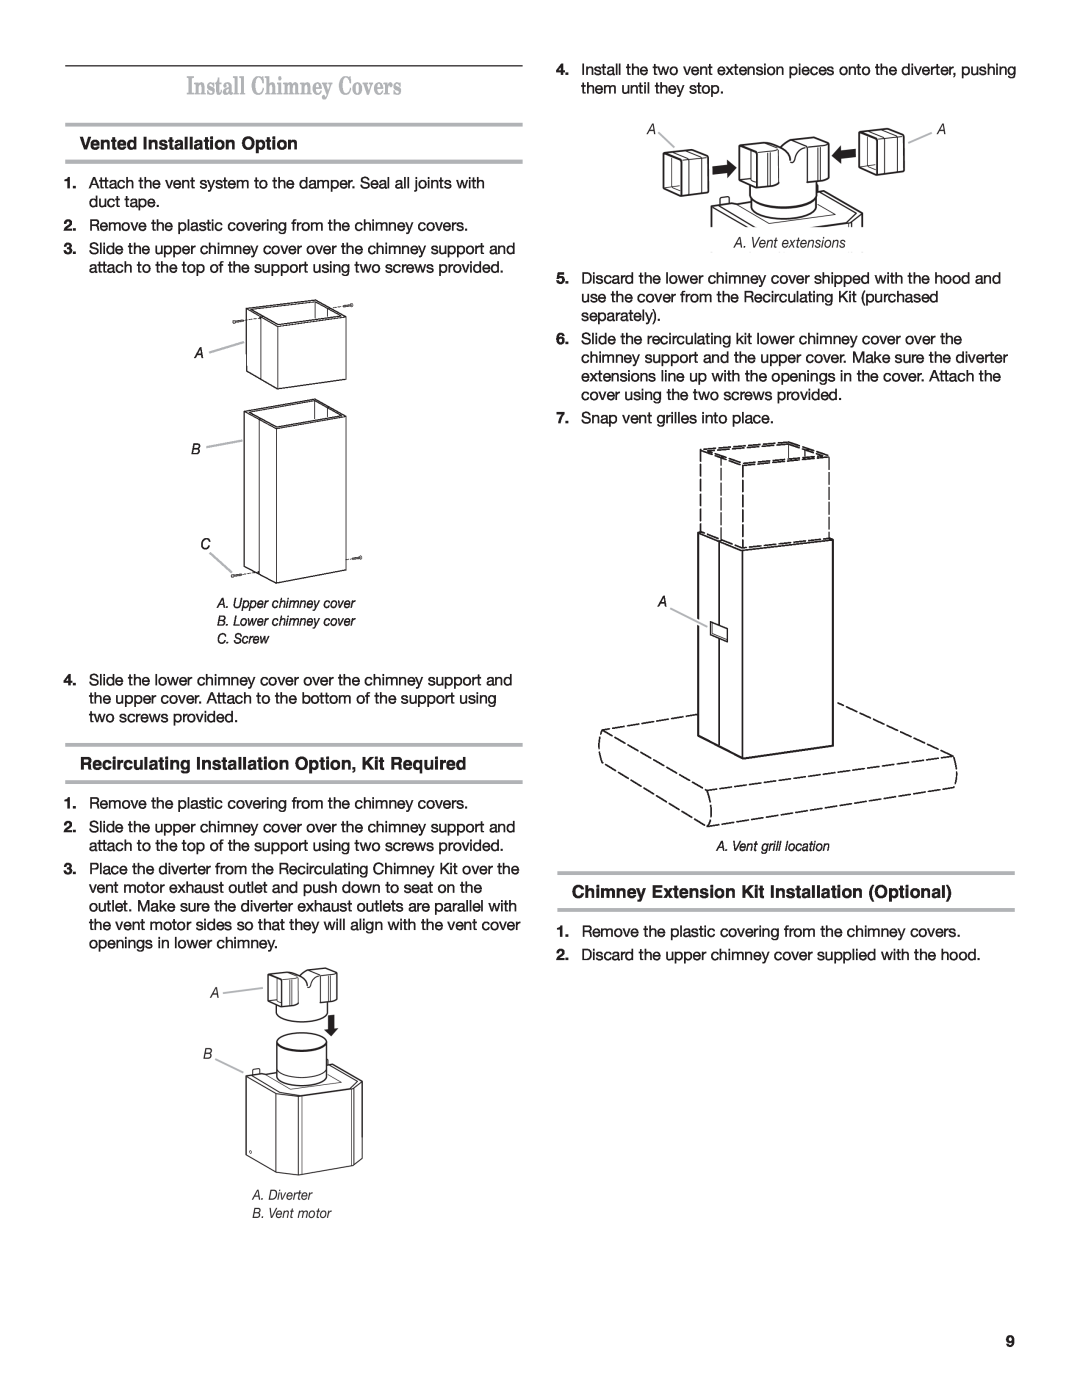 KitchenAid 9763382 Install Chimney Covers, Vented Installation Option, Recirculating Installation Option, Kit Required 